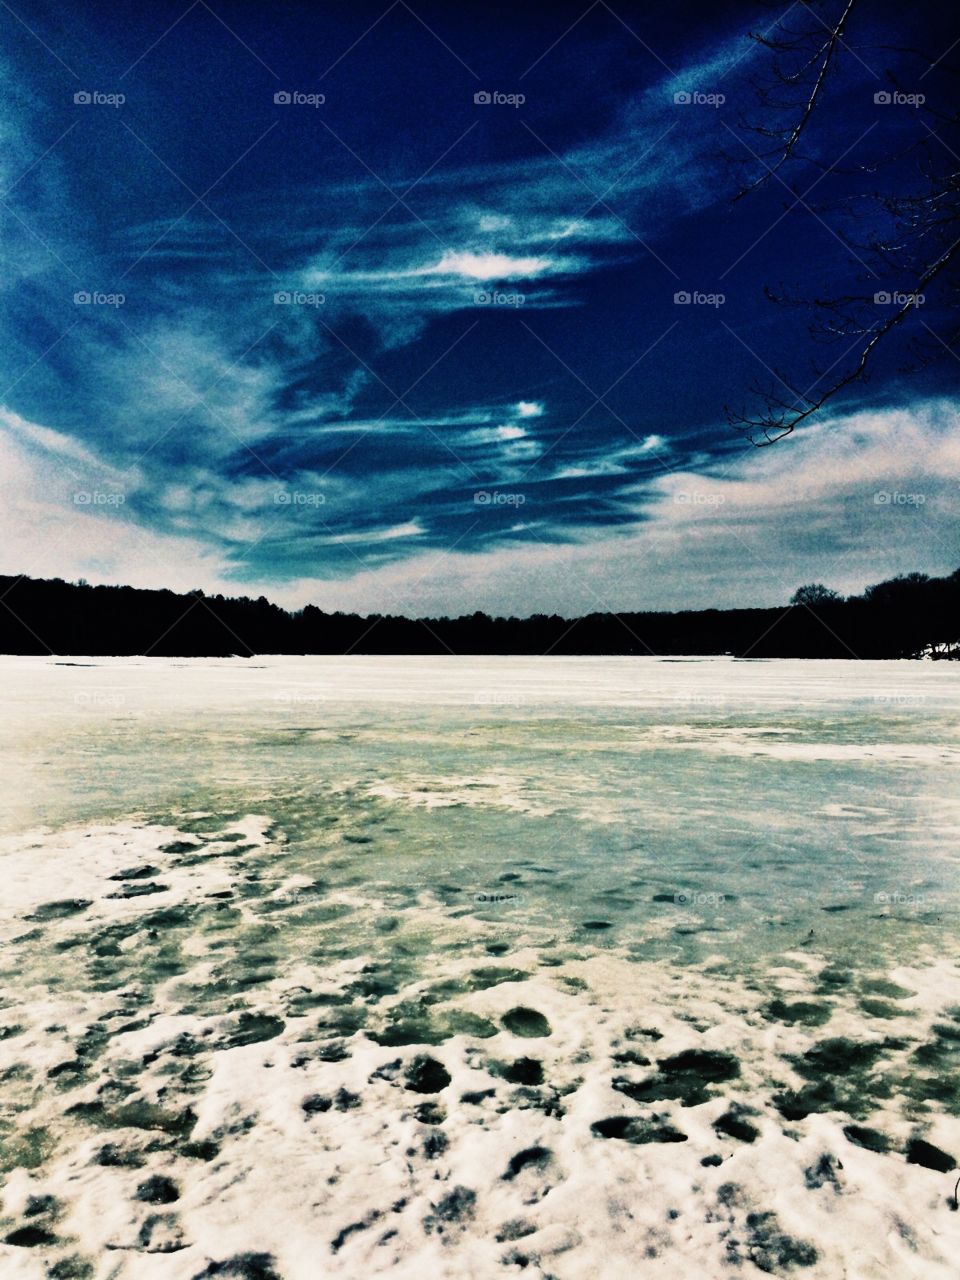 Winter and frozen lake
